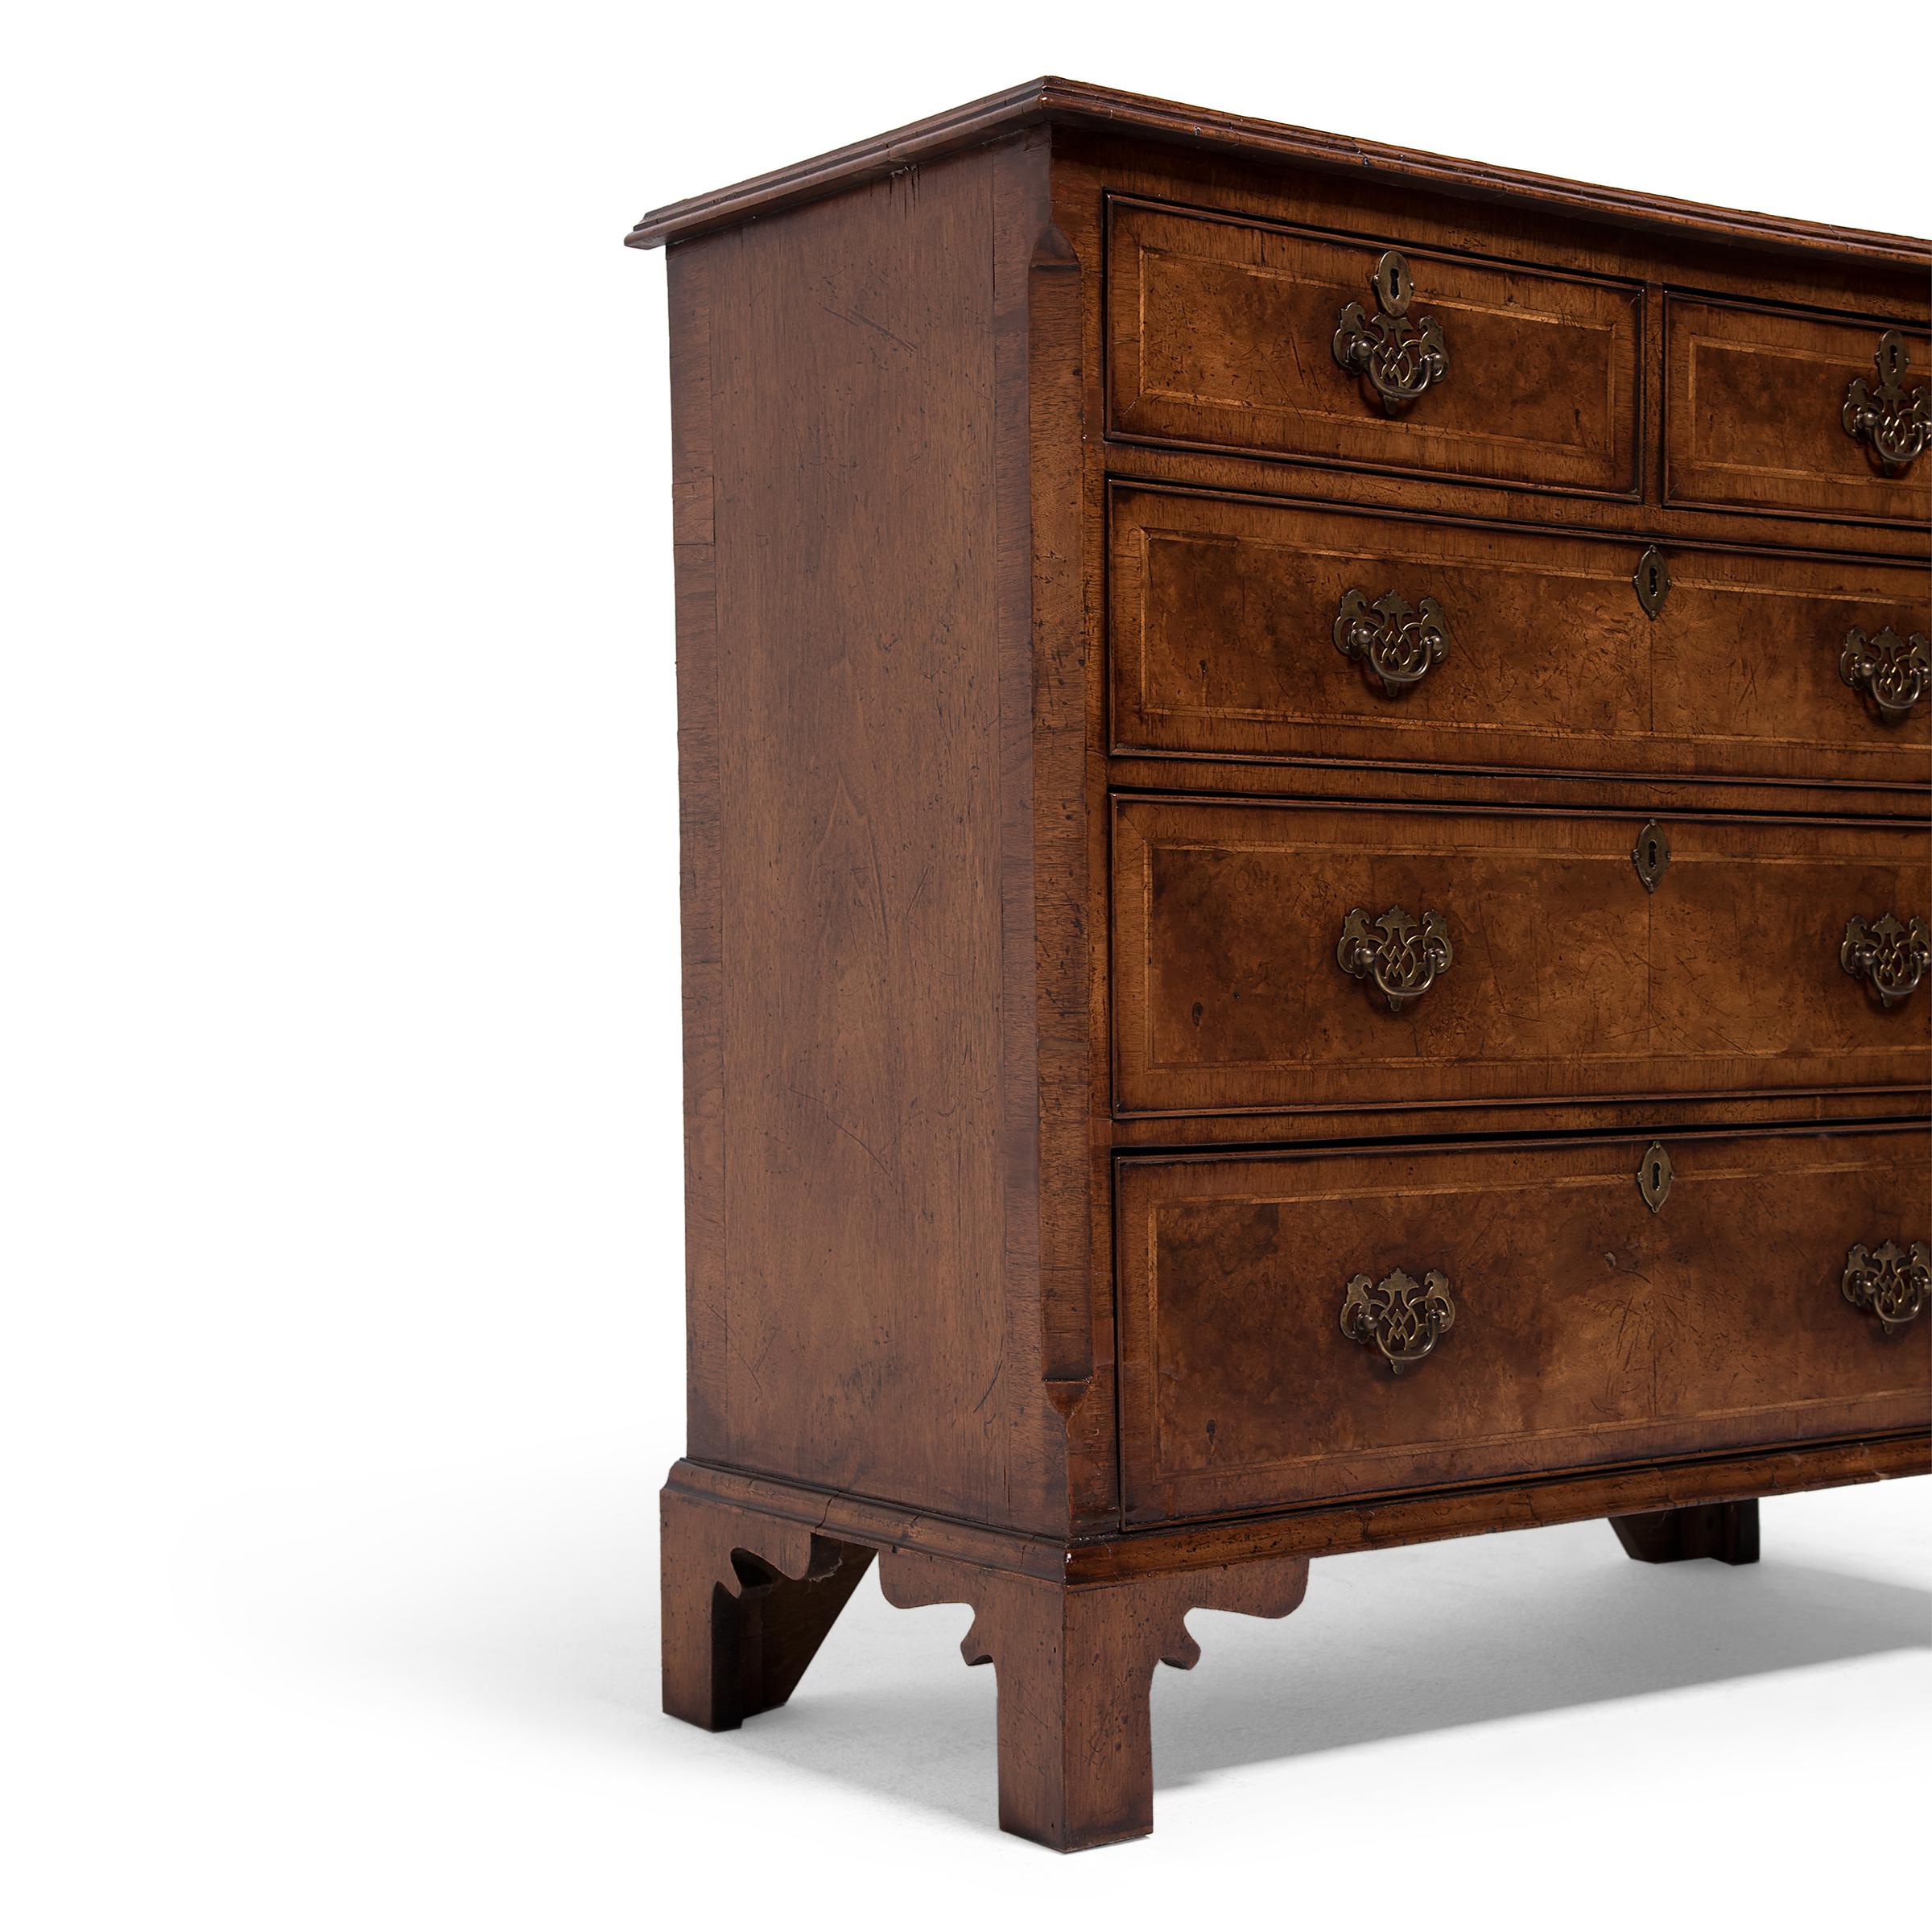 18th Century Queen Anne Style Burled Walnut Chest of Drawers, c. 1800 For Sale